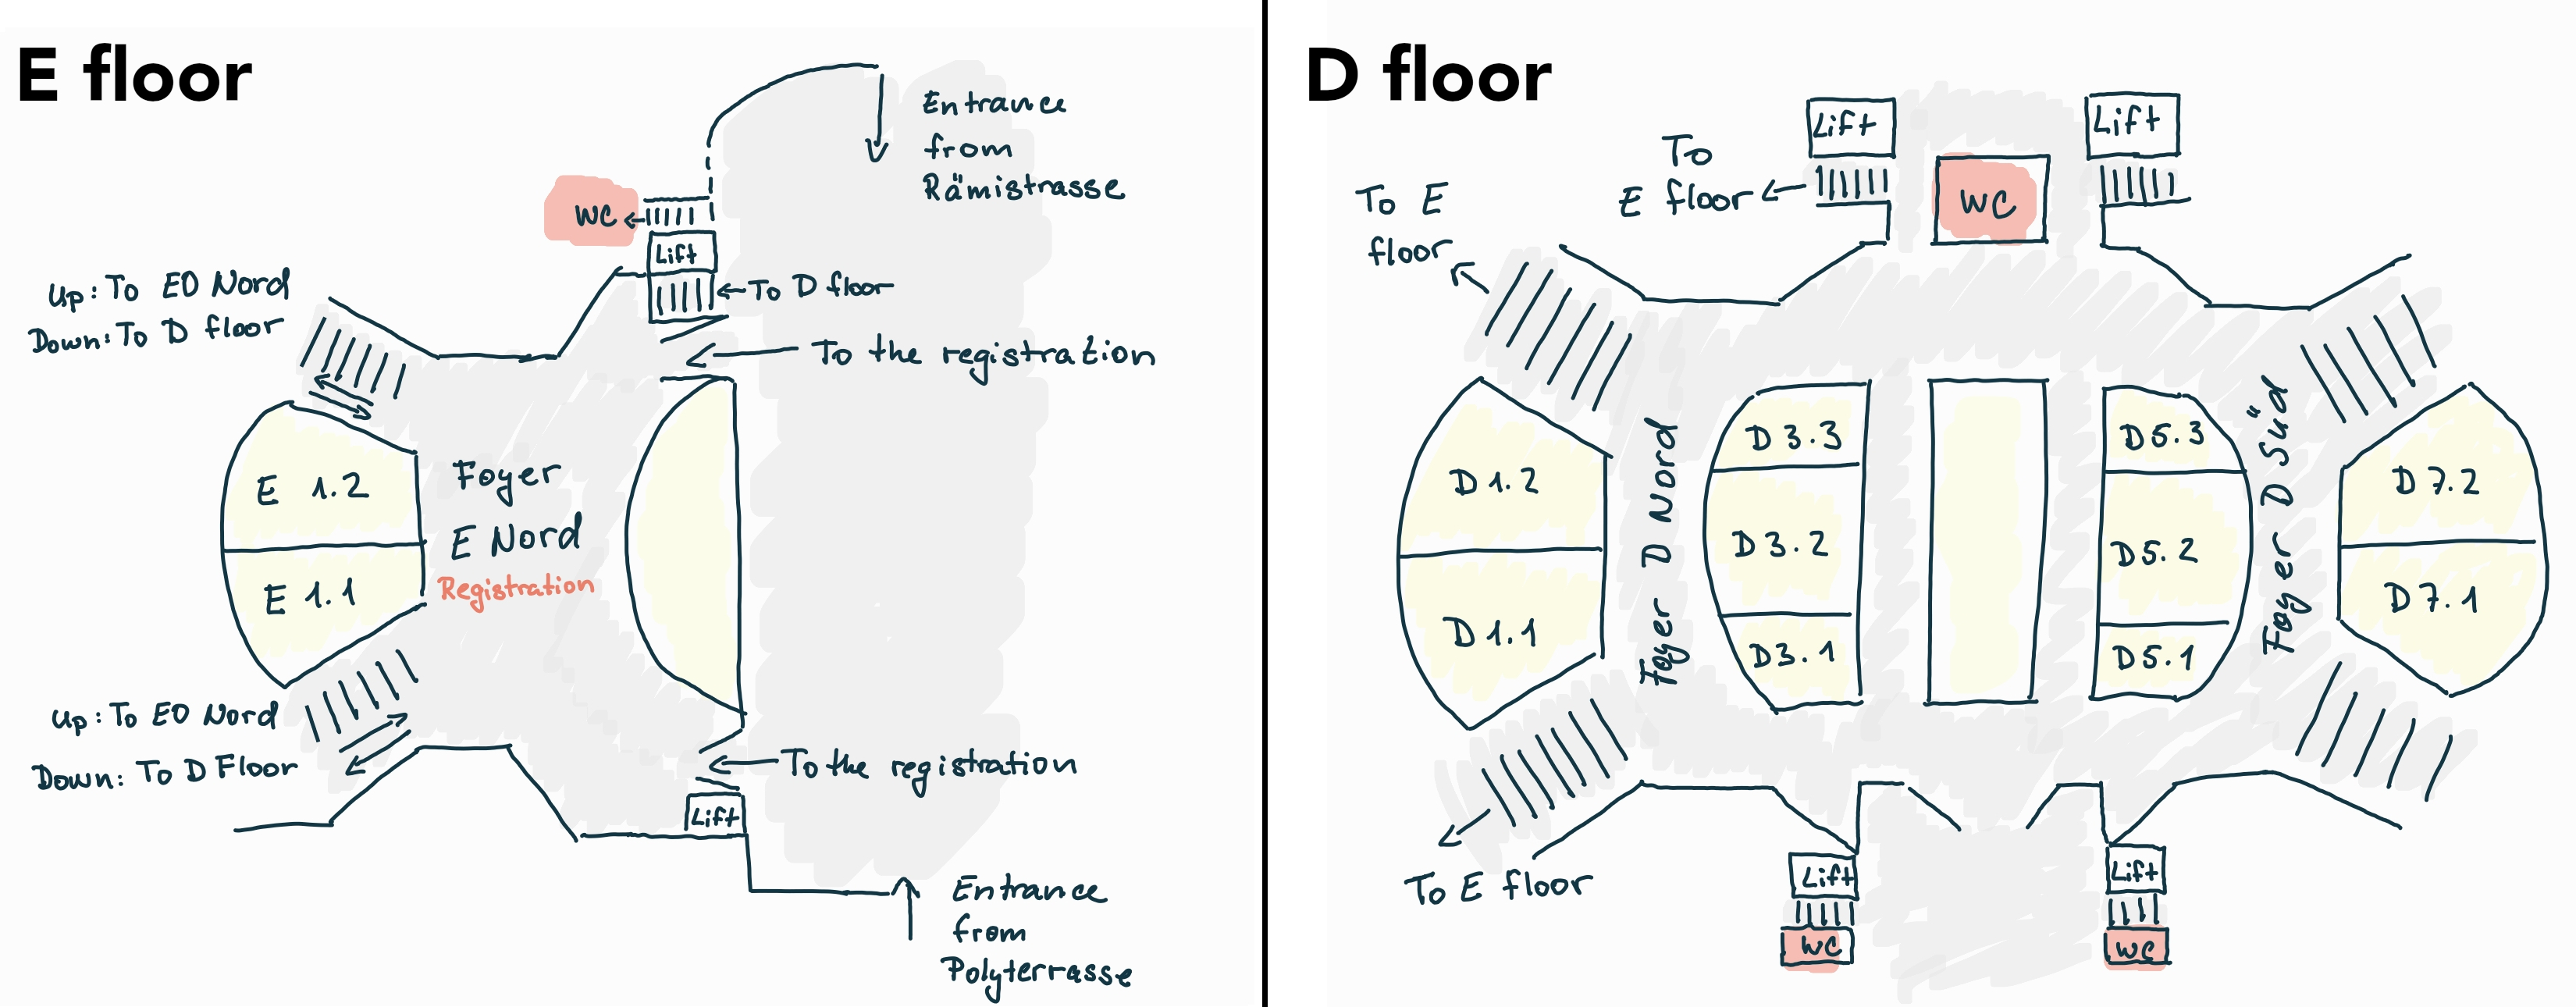 ETH Hauptgebäude (HG), floorplan for the affiliated events rooms